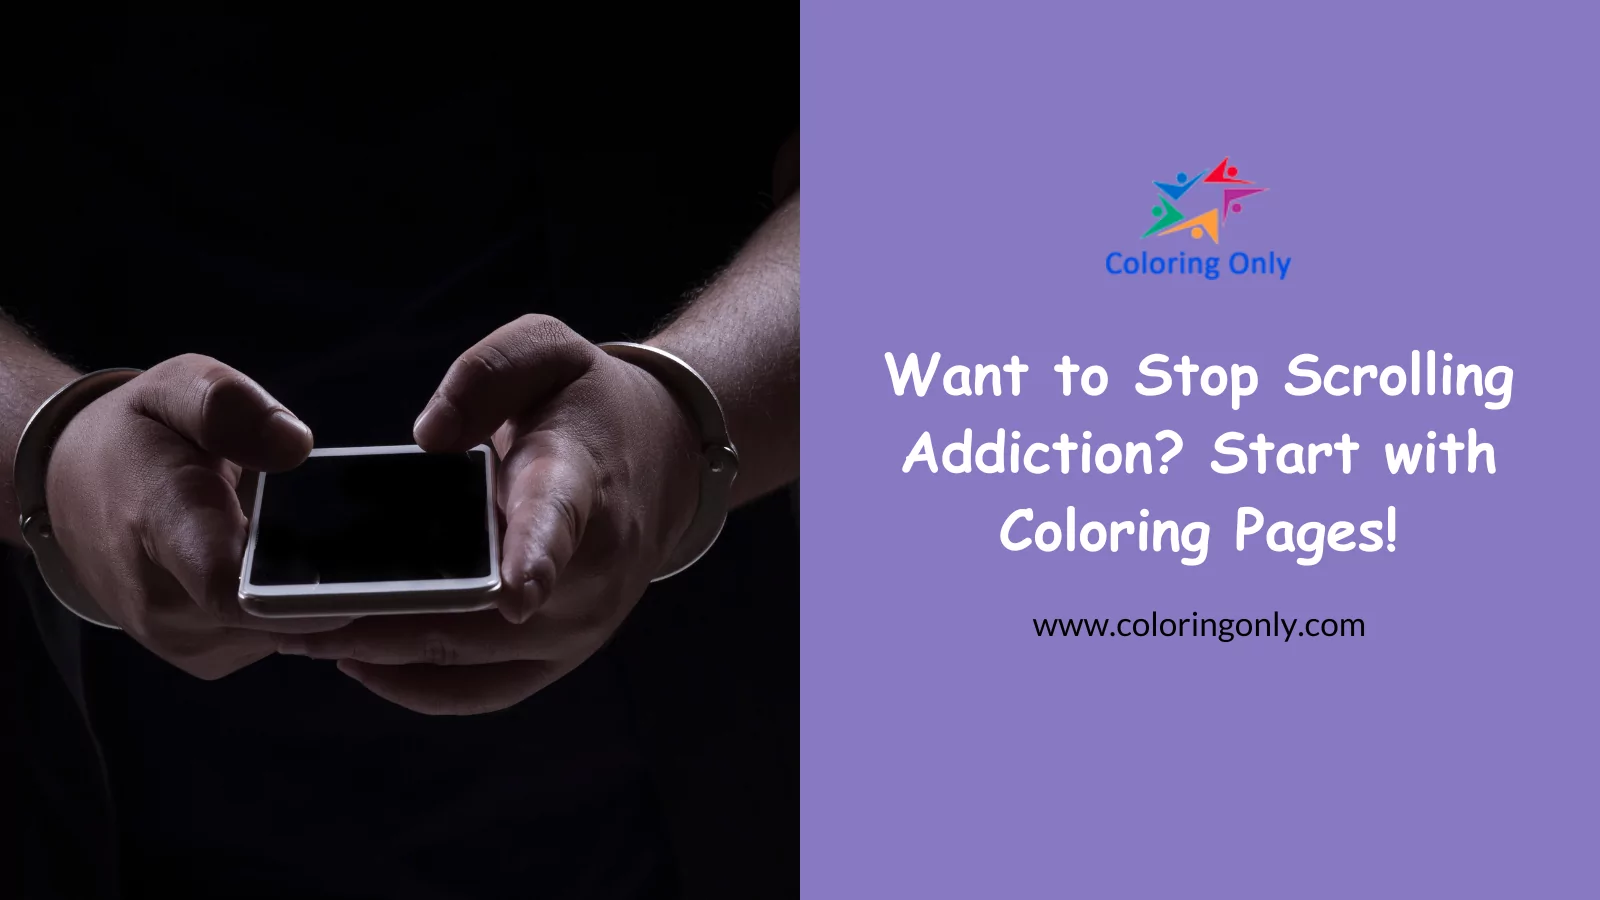 Want to Stop Scrolling Addiction? Start with Coloring Pages!